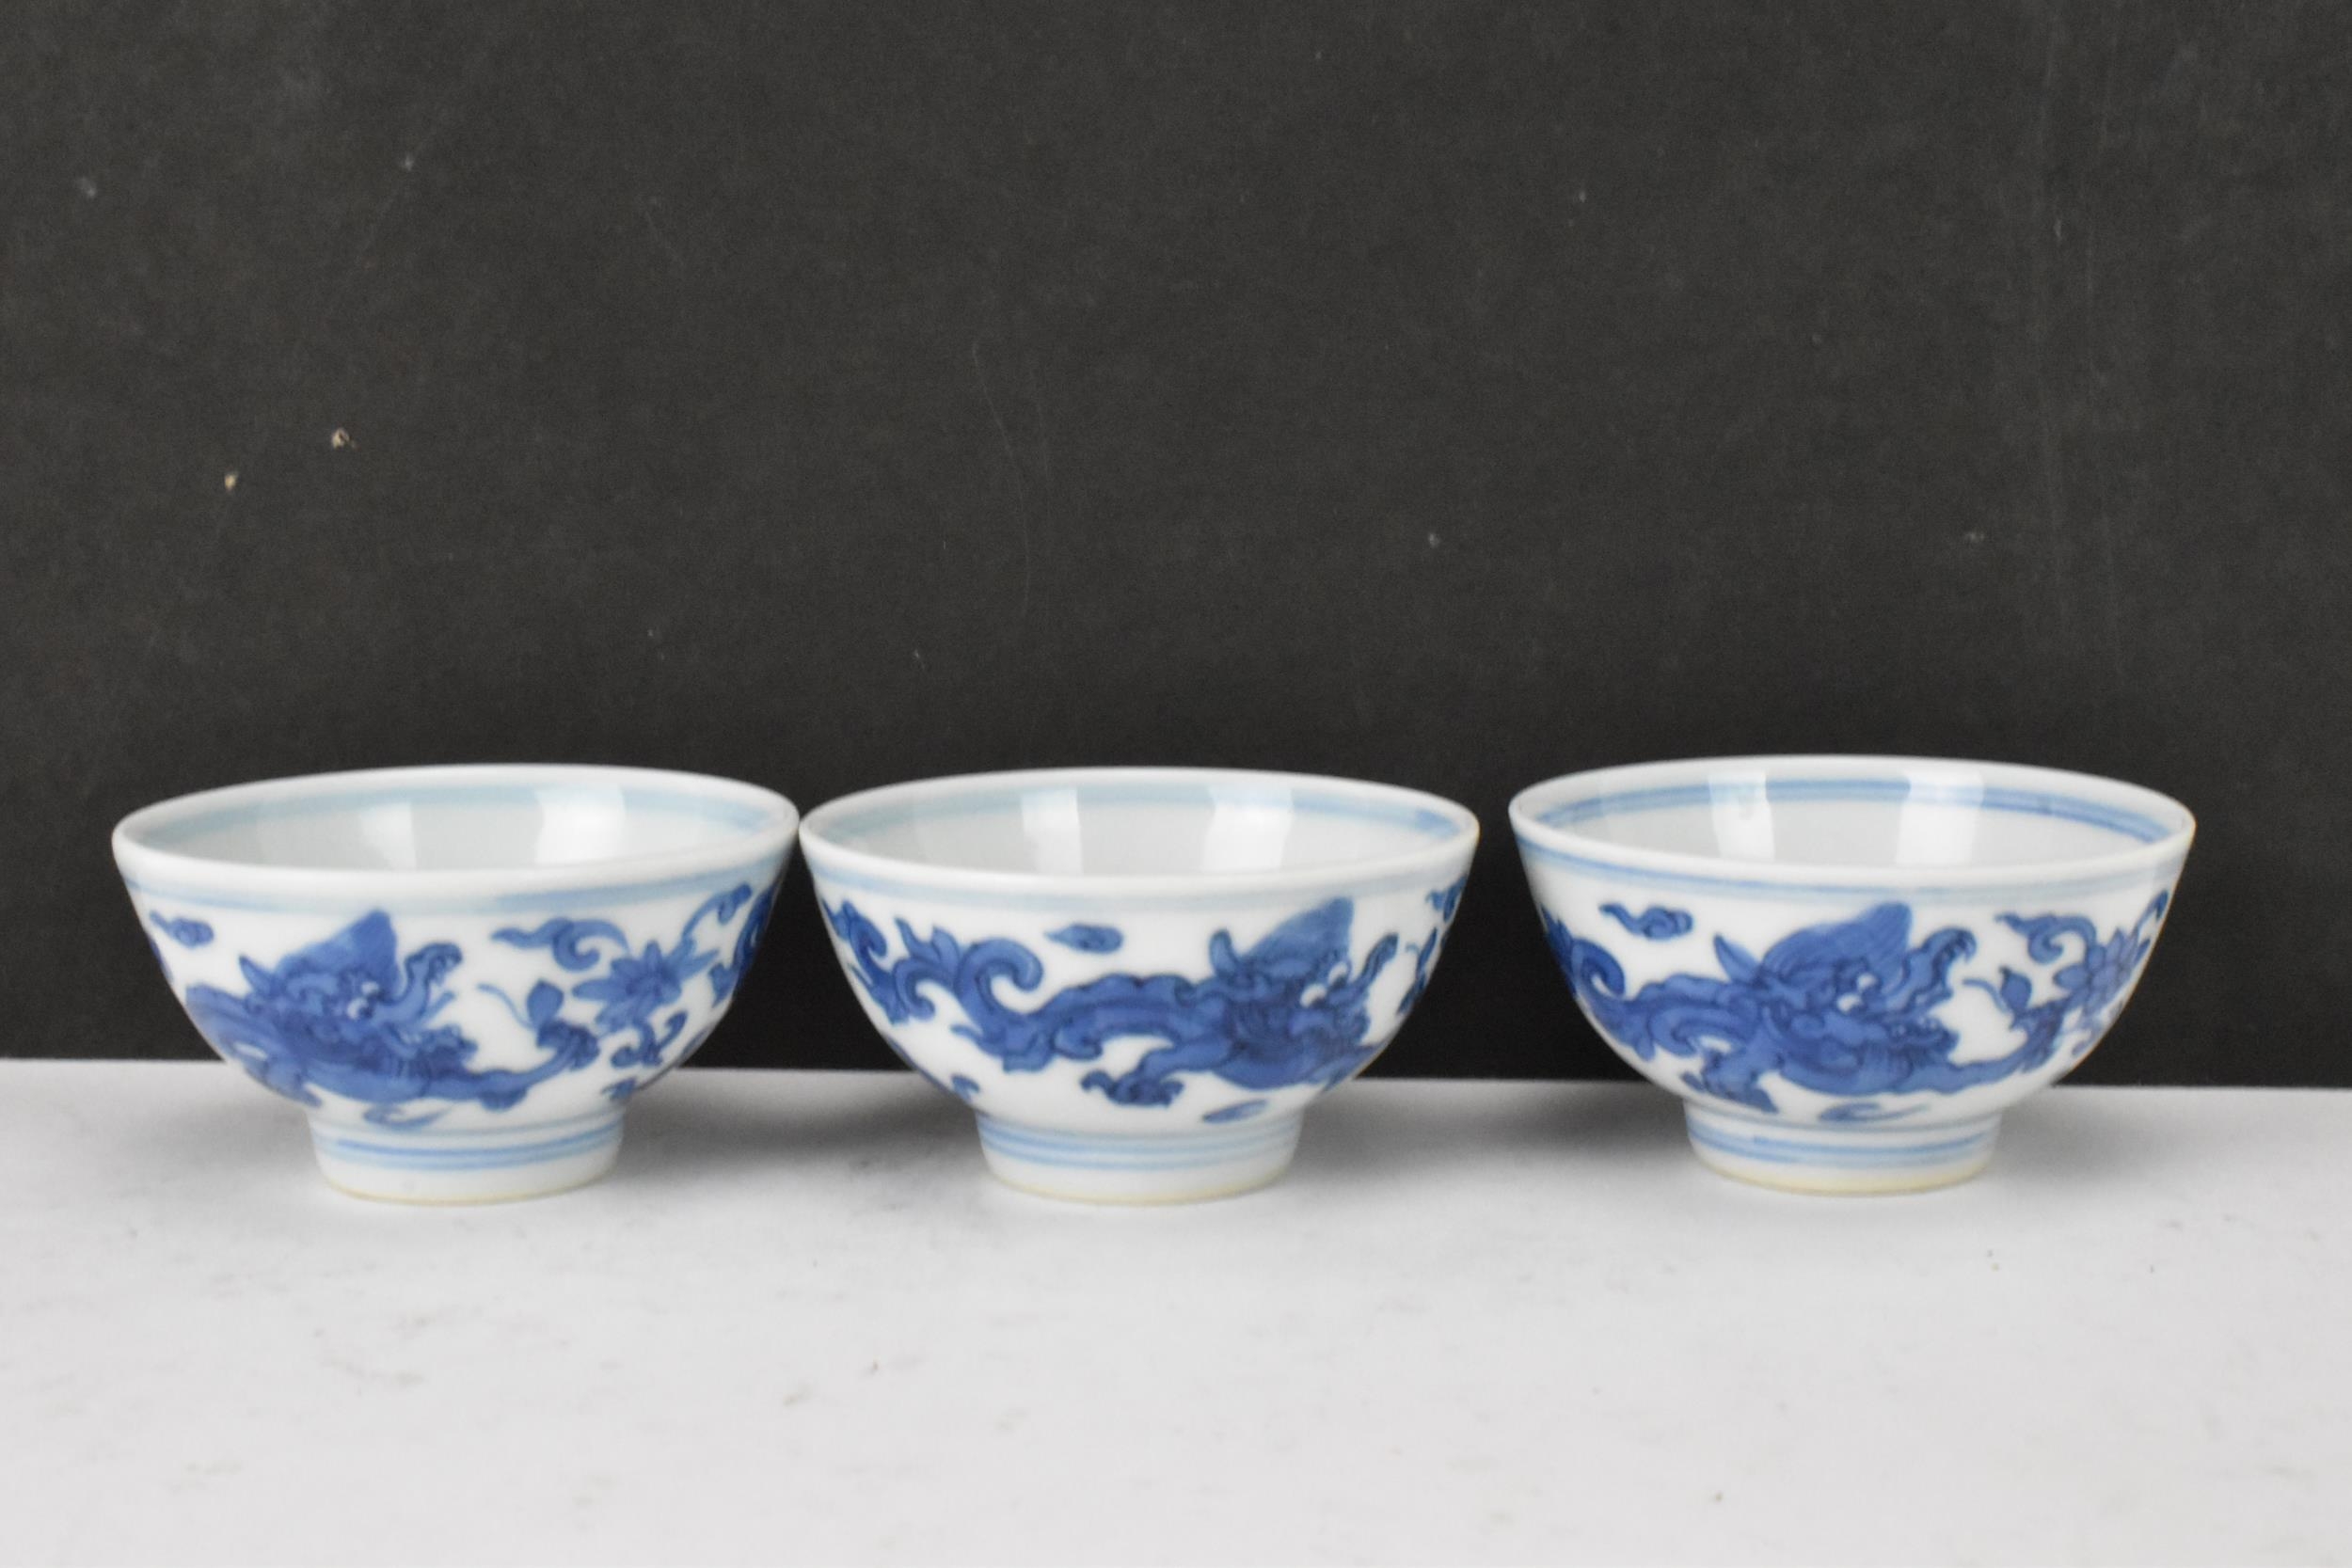 Three Chinese 20th century blue and white bowls, decorated with dragons and interiors with central - Image 2 of 9